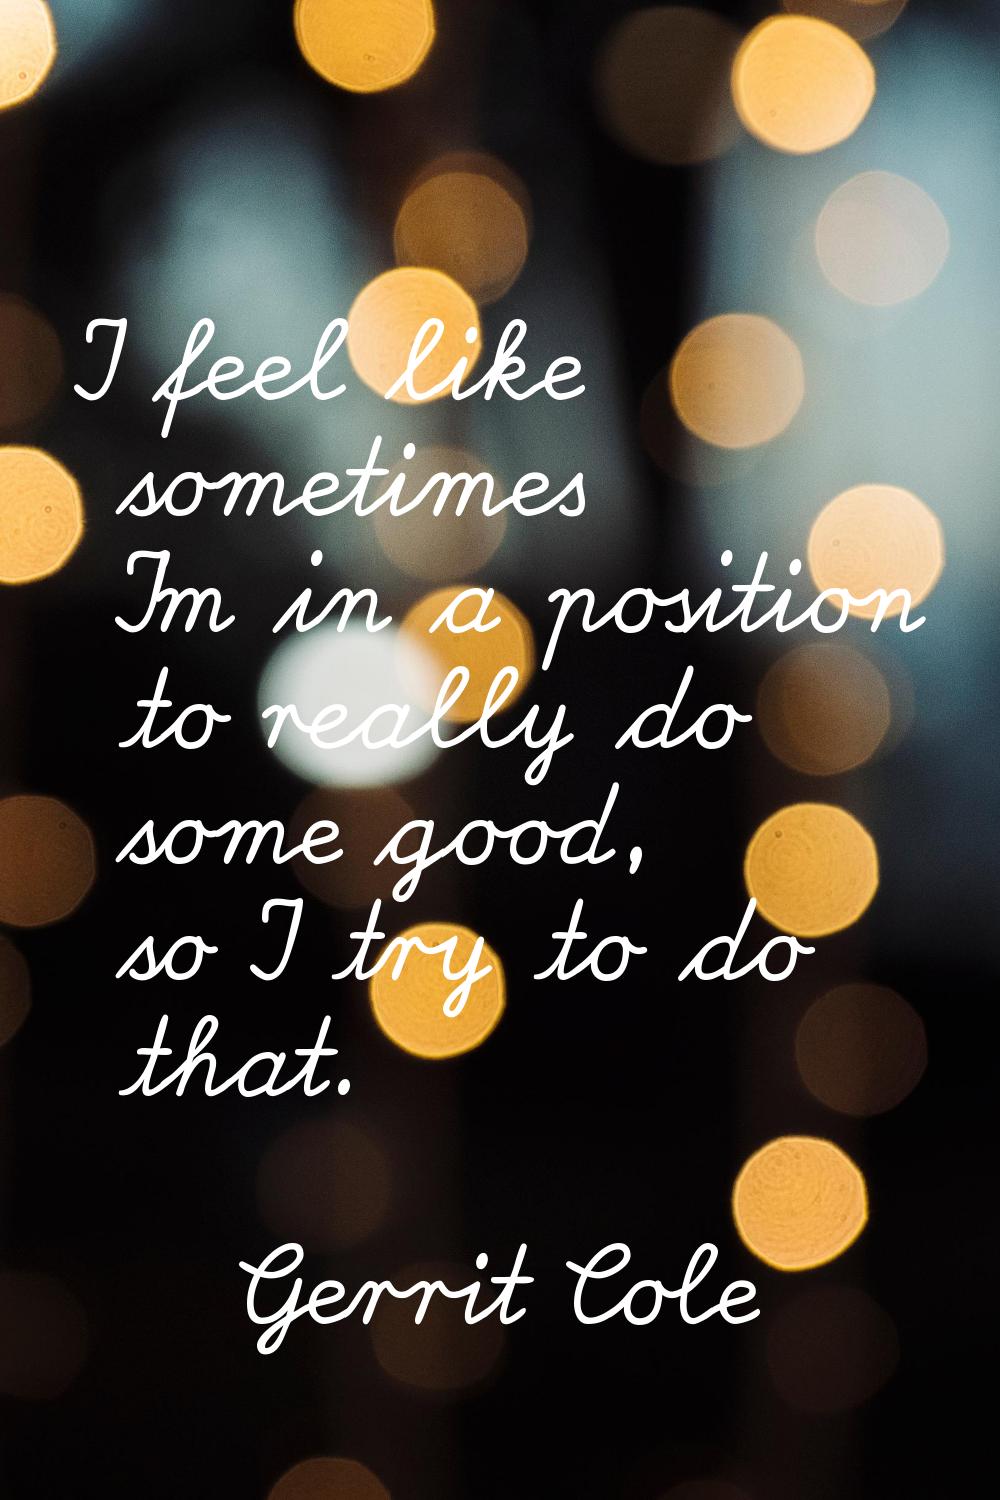 I feel like sometimes I'm in a position to really do some good, so I try to do that.